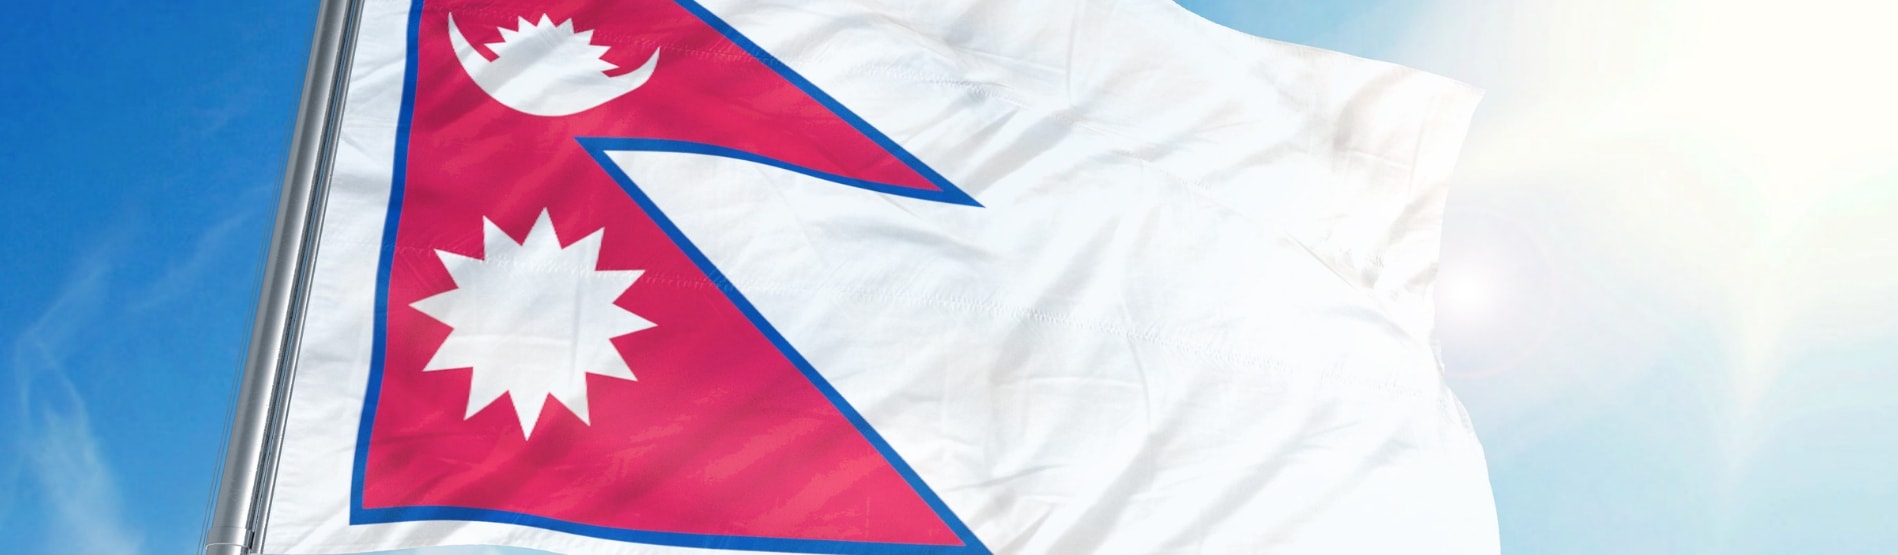 Flag of Nepal waving in the breeze.